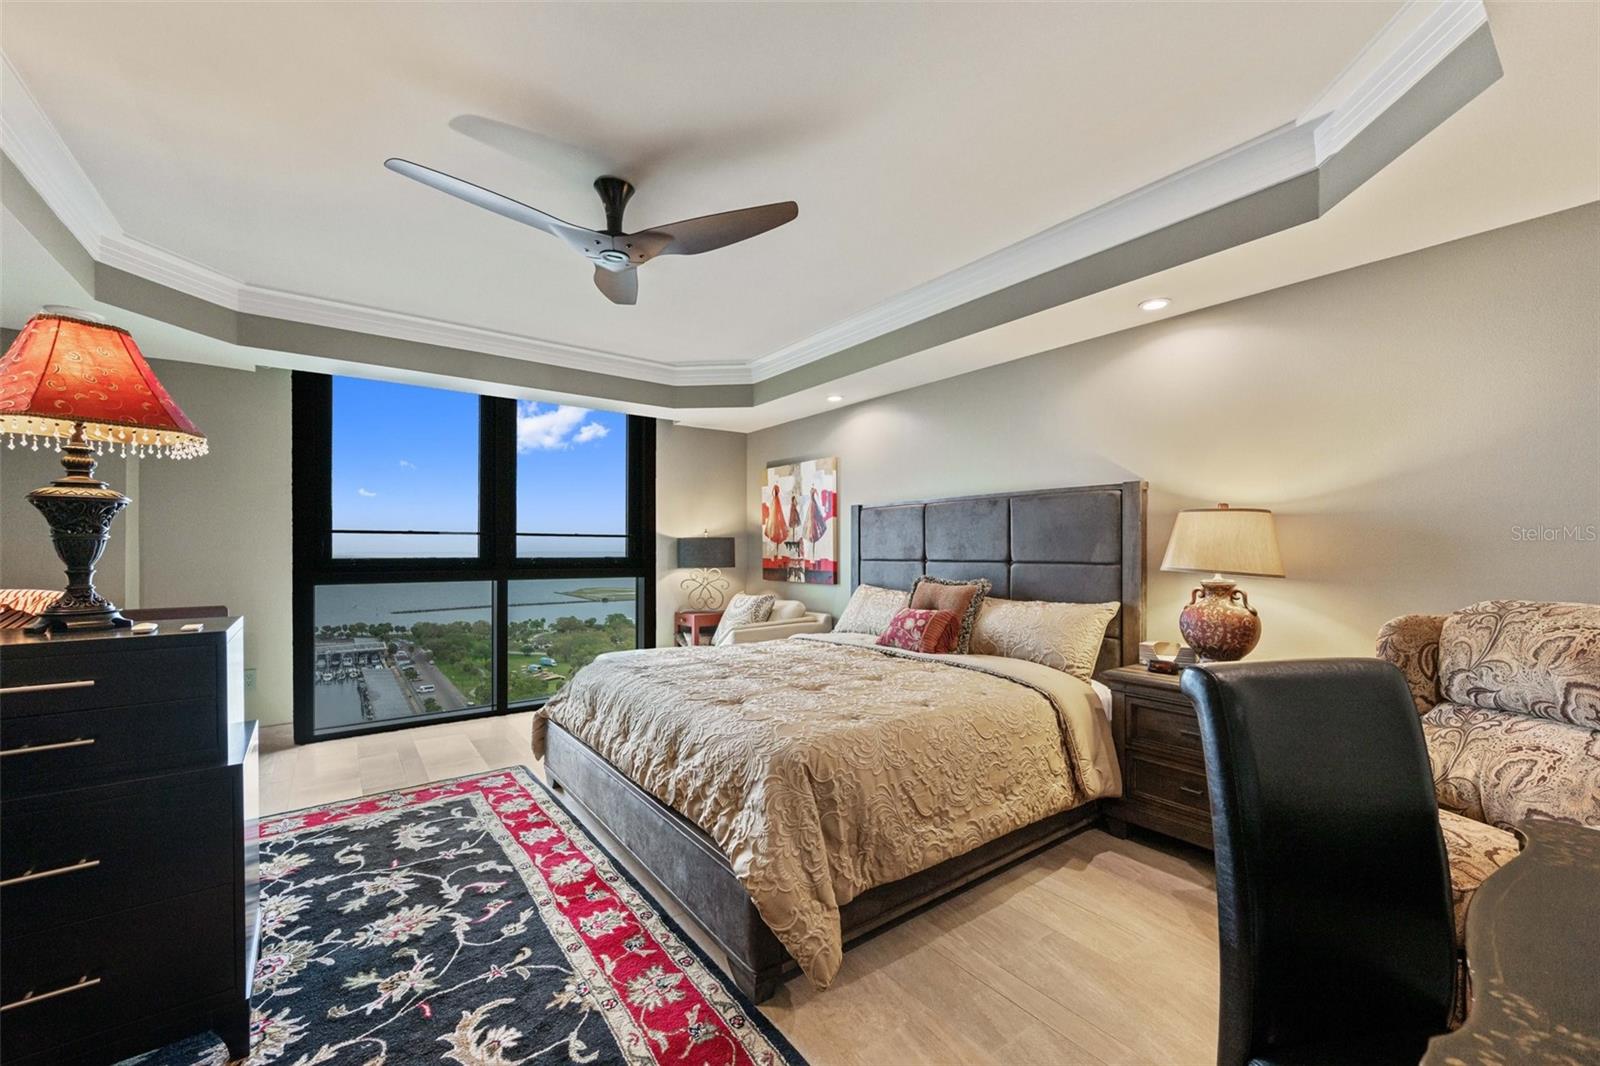 Master bedroom with incredible ceilings, best views around, and nice finishes next to large size, this is a king size bed and still tons of room...